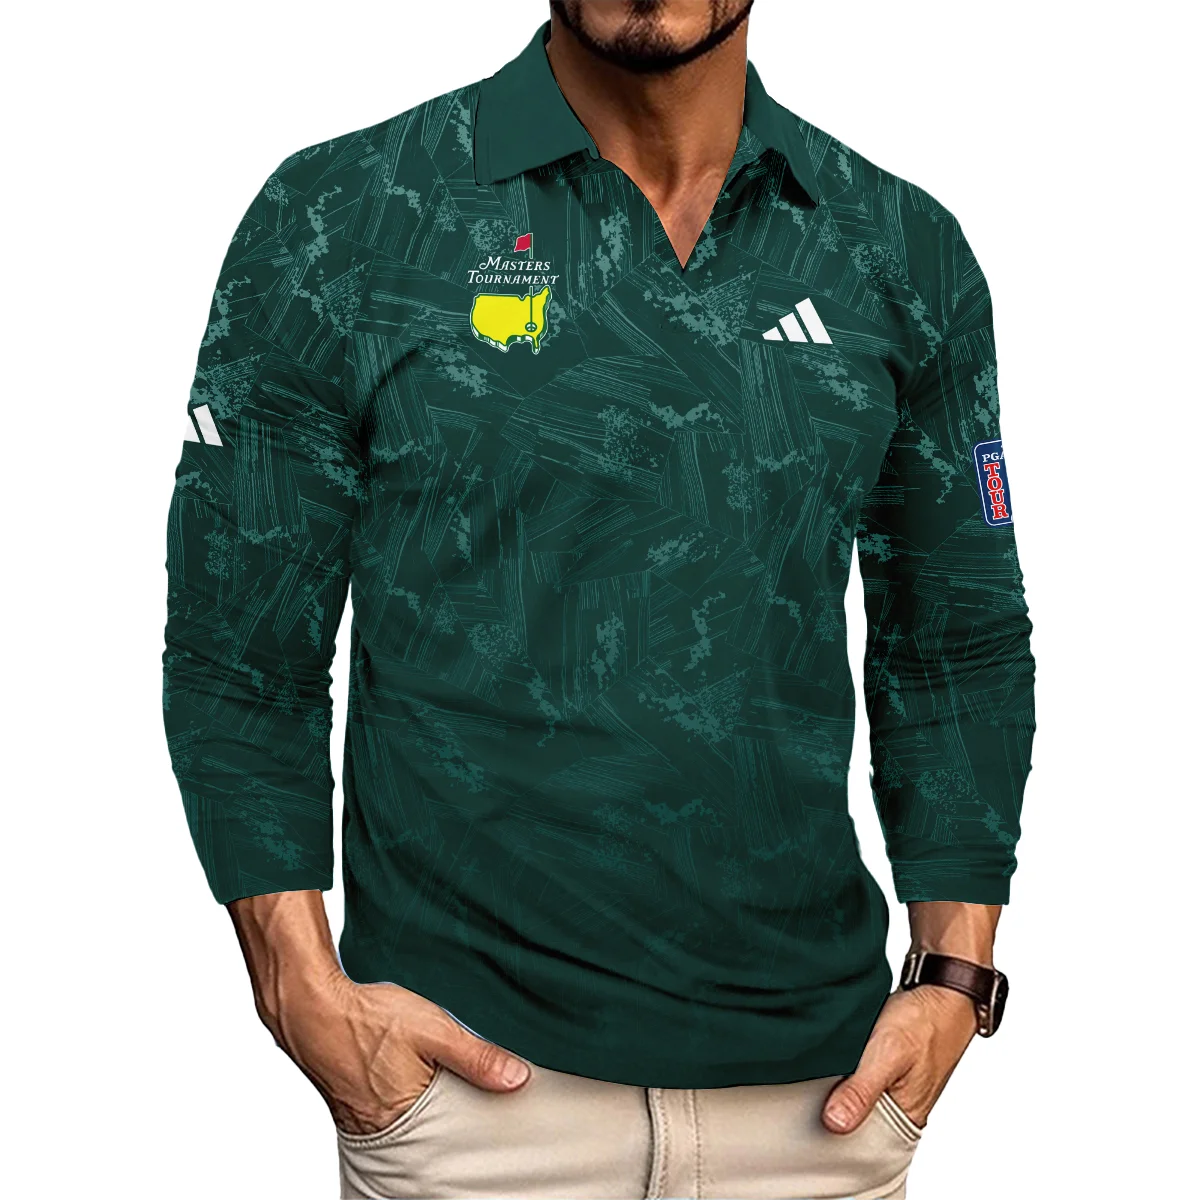 Dark Green Background Masters Tournament Adidas Polo Shirt Style Classic Polo Shirt For Men